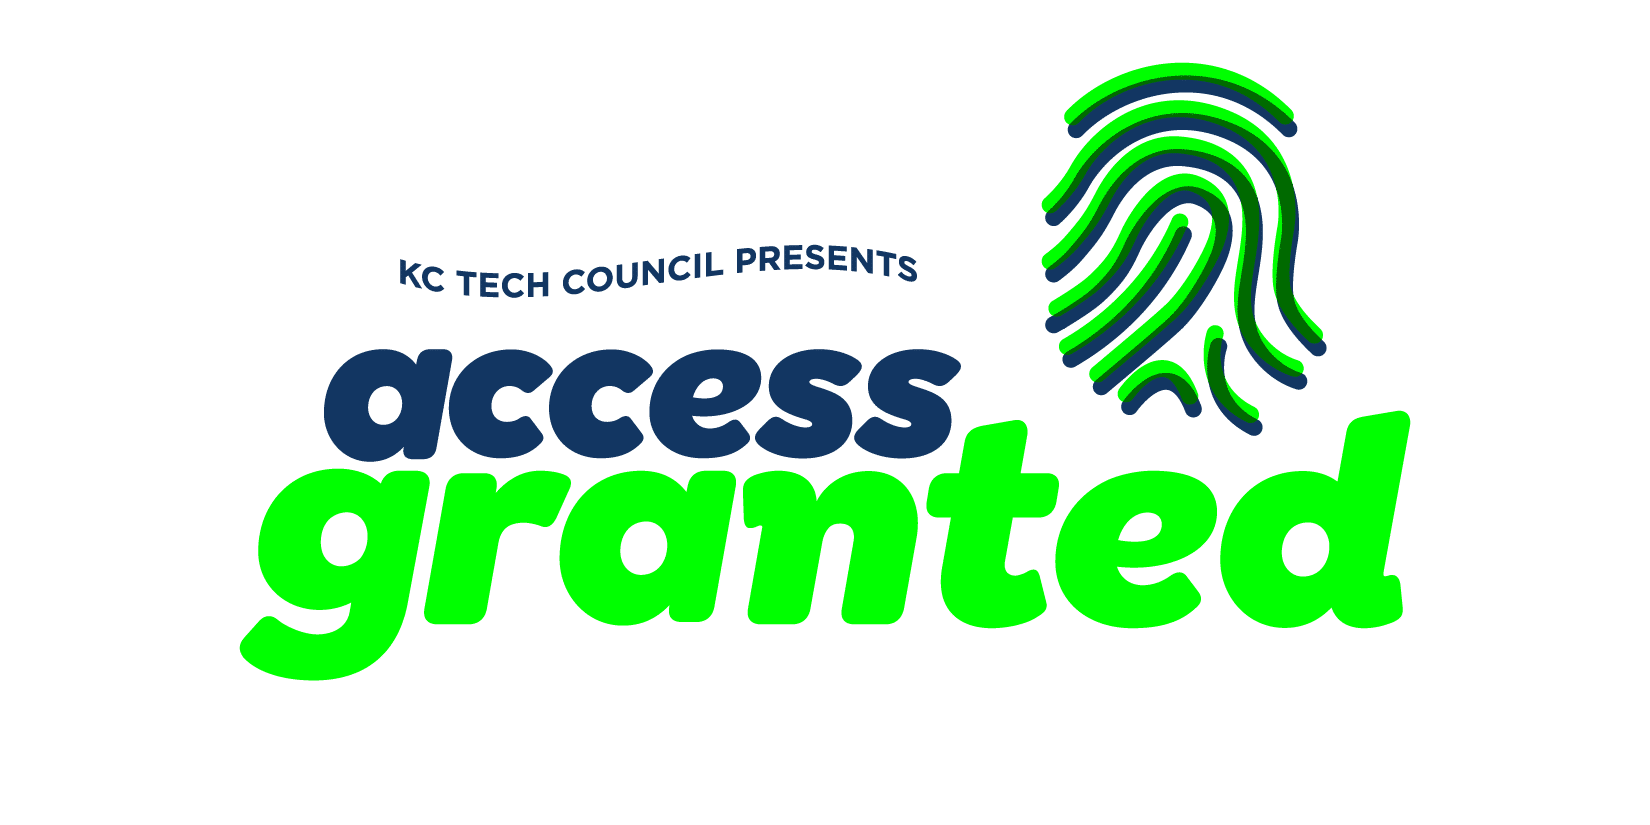 KC Tech Council hosted its annual Access: Granted event, connecting members with area tech leaders.